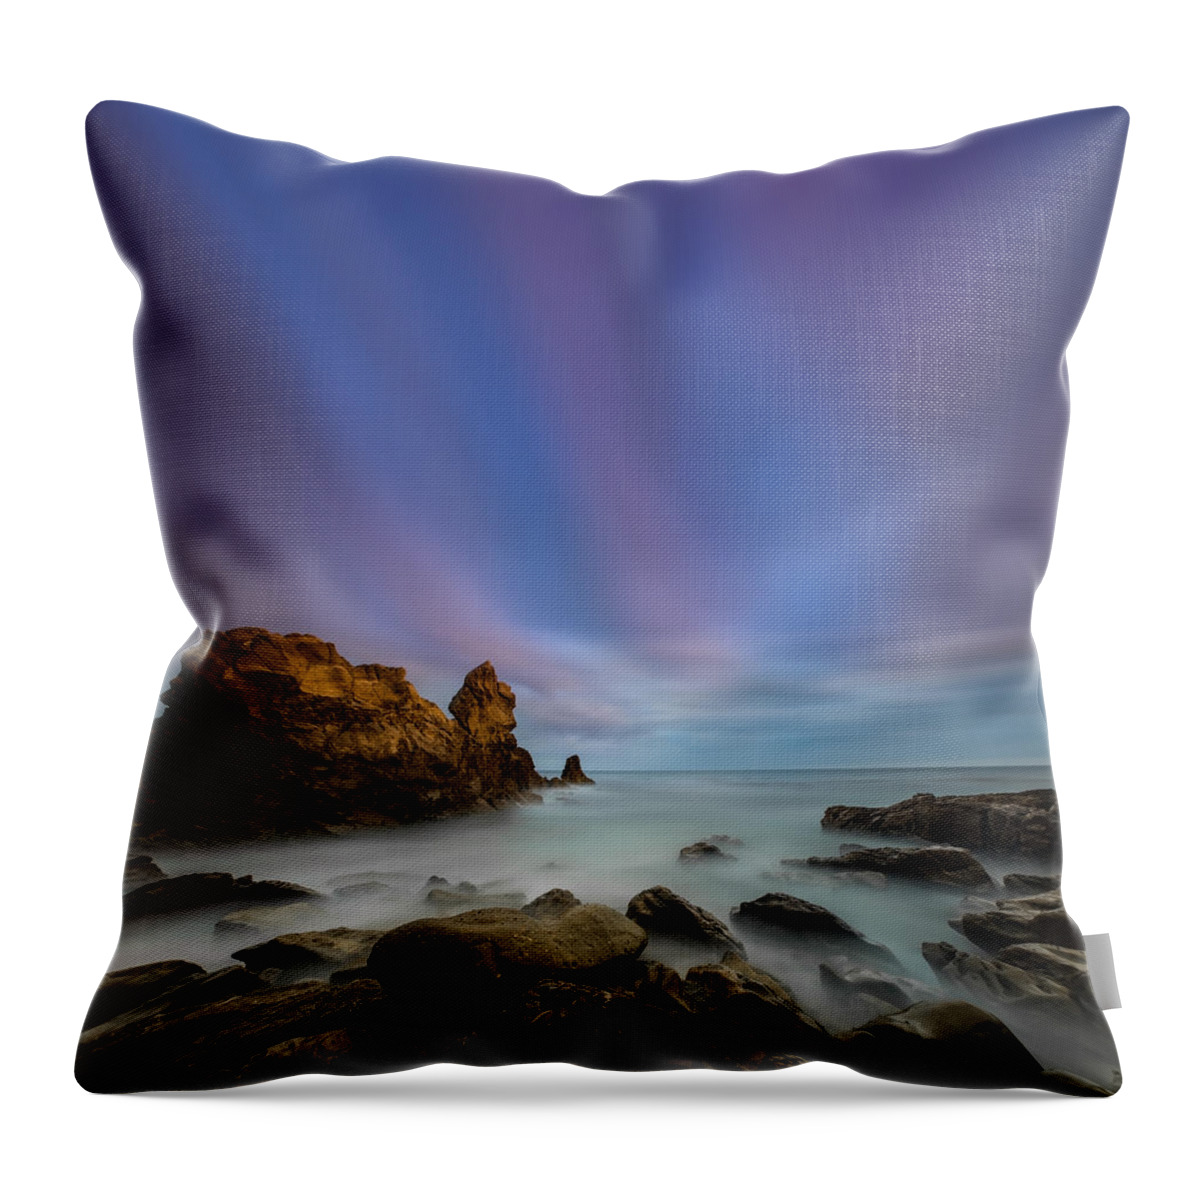 Corona Del Mar Throw Pillow featuring the photograph Rocky Southern California Beach 2 by Larry Marshall